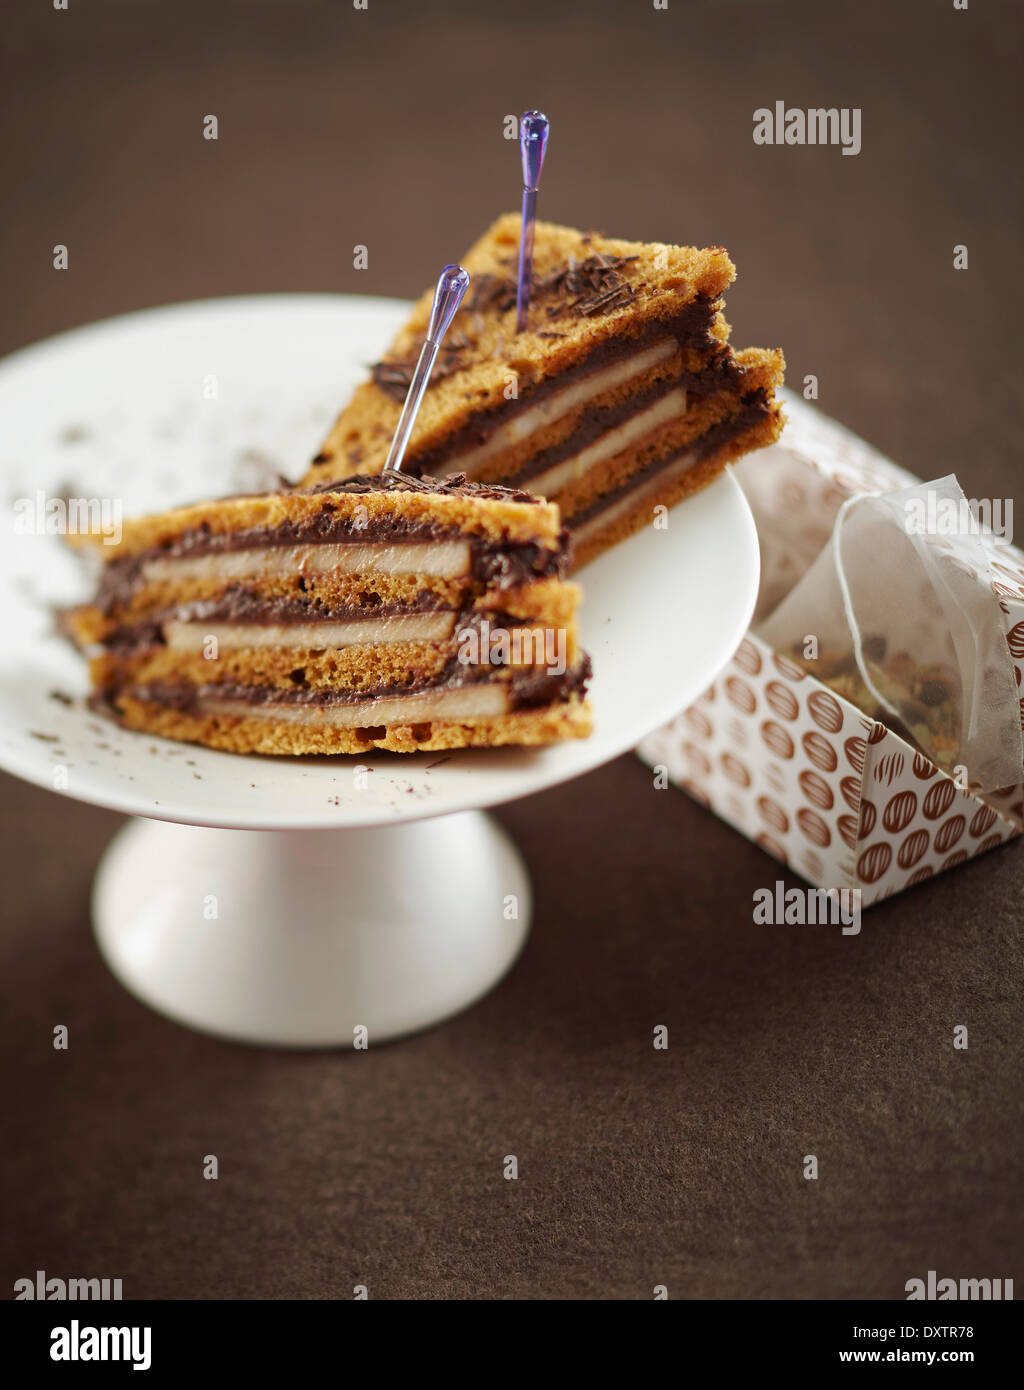 Chocolate and pear gingerbread club sandwich Stock Photo